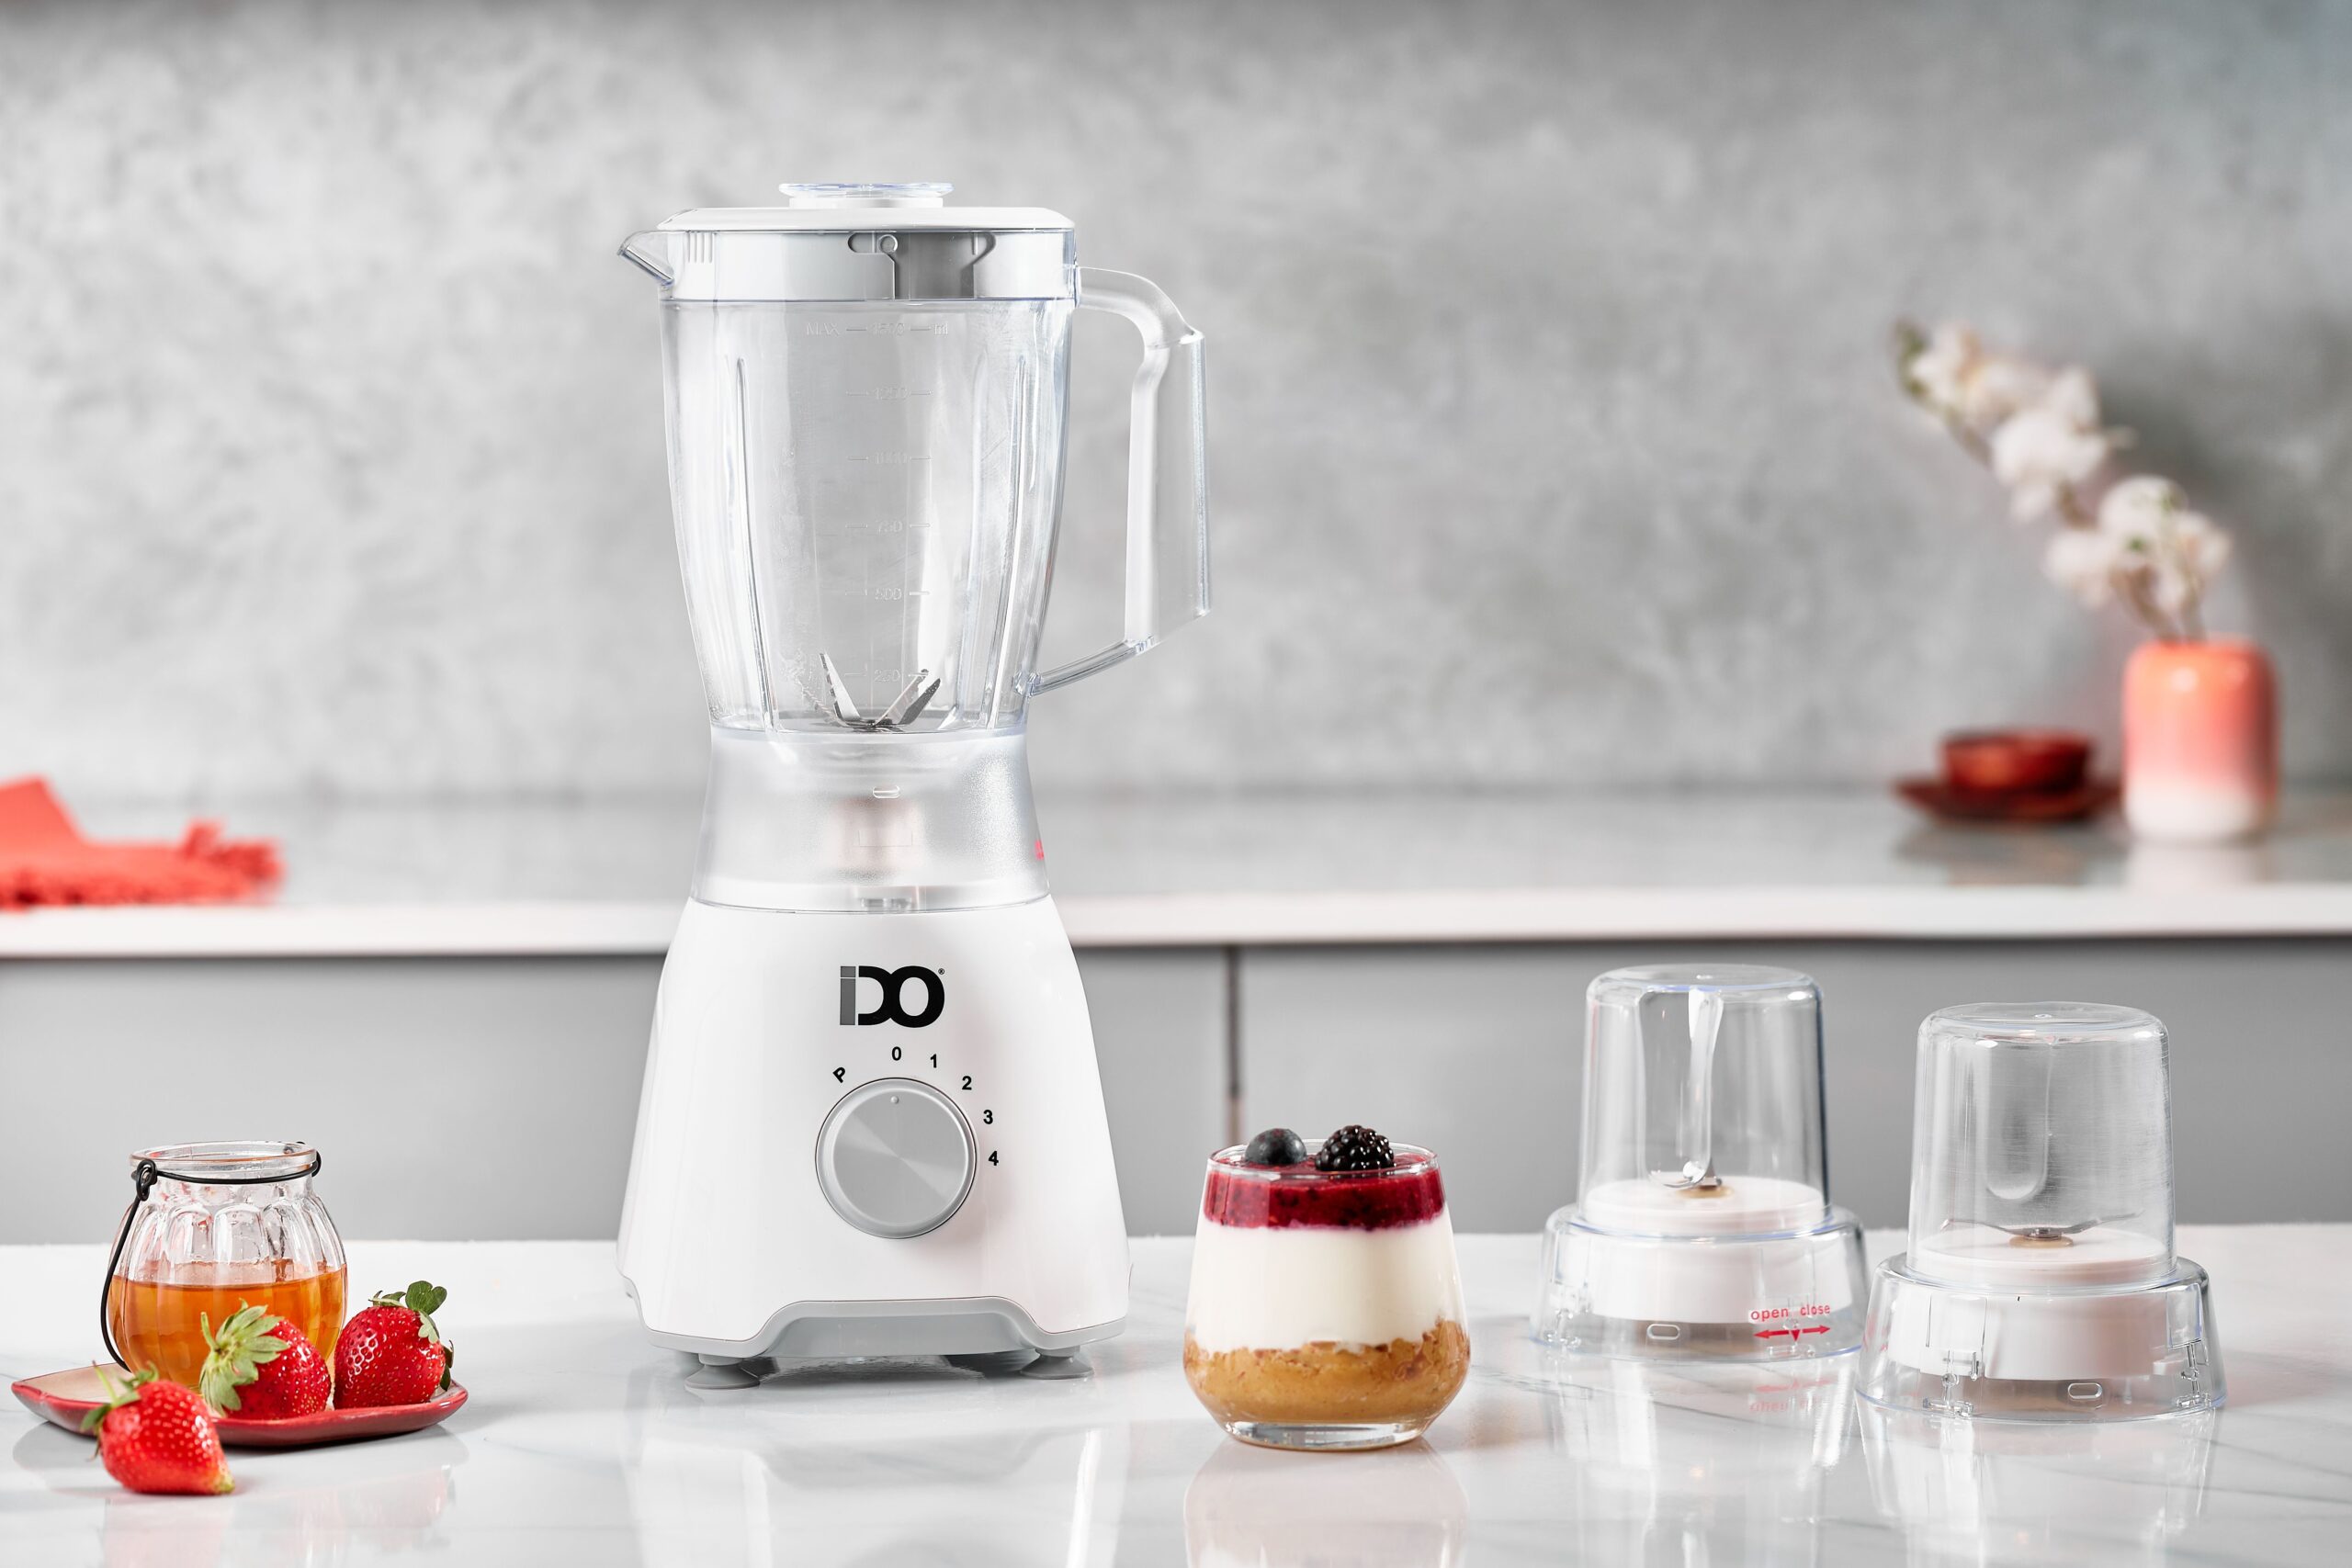 https://anasiashop.com/wp-content/uploads/2023/01/IDO-Blender-2-grinder-600-W-with-Pulse-Function-%E2%80%93-White-compressed-scaled.jpg